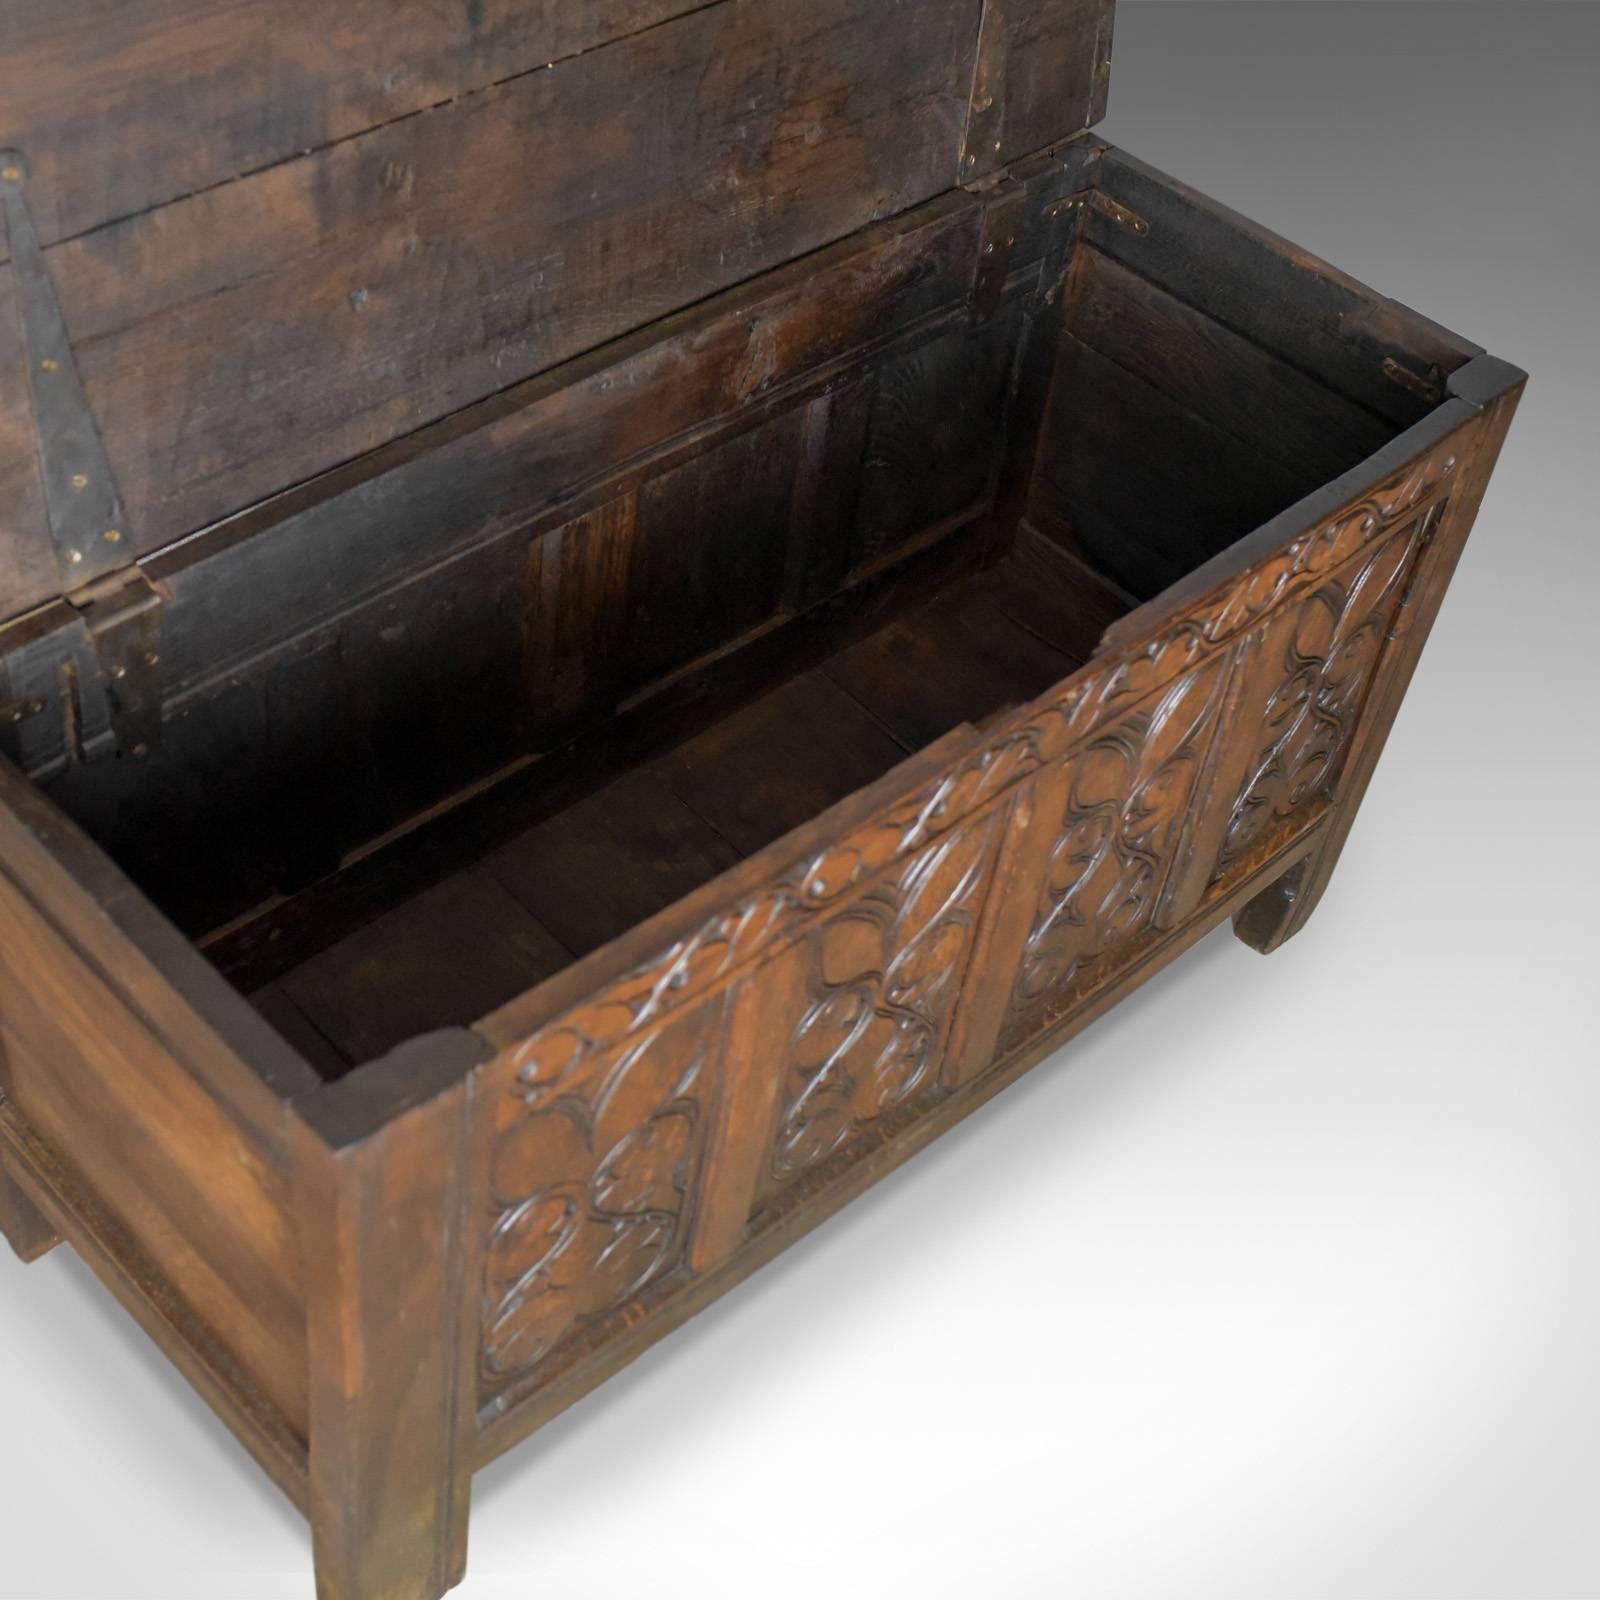 Queen Anne Antique Coffer, Large, English Oak Chest, Early 18th Century Trunk, circa 1700 For Sale